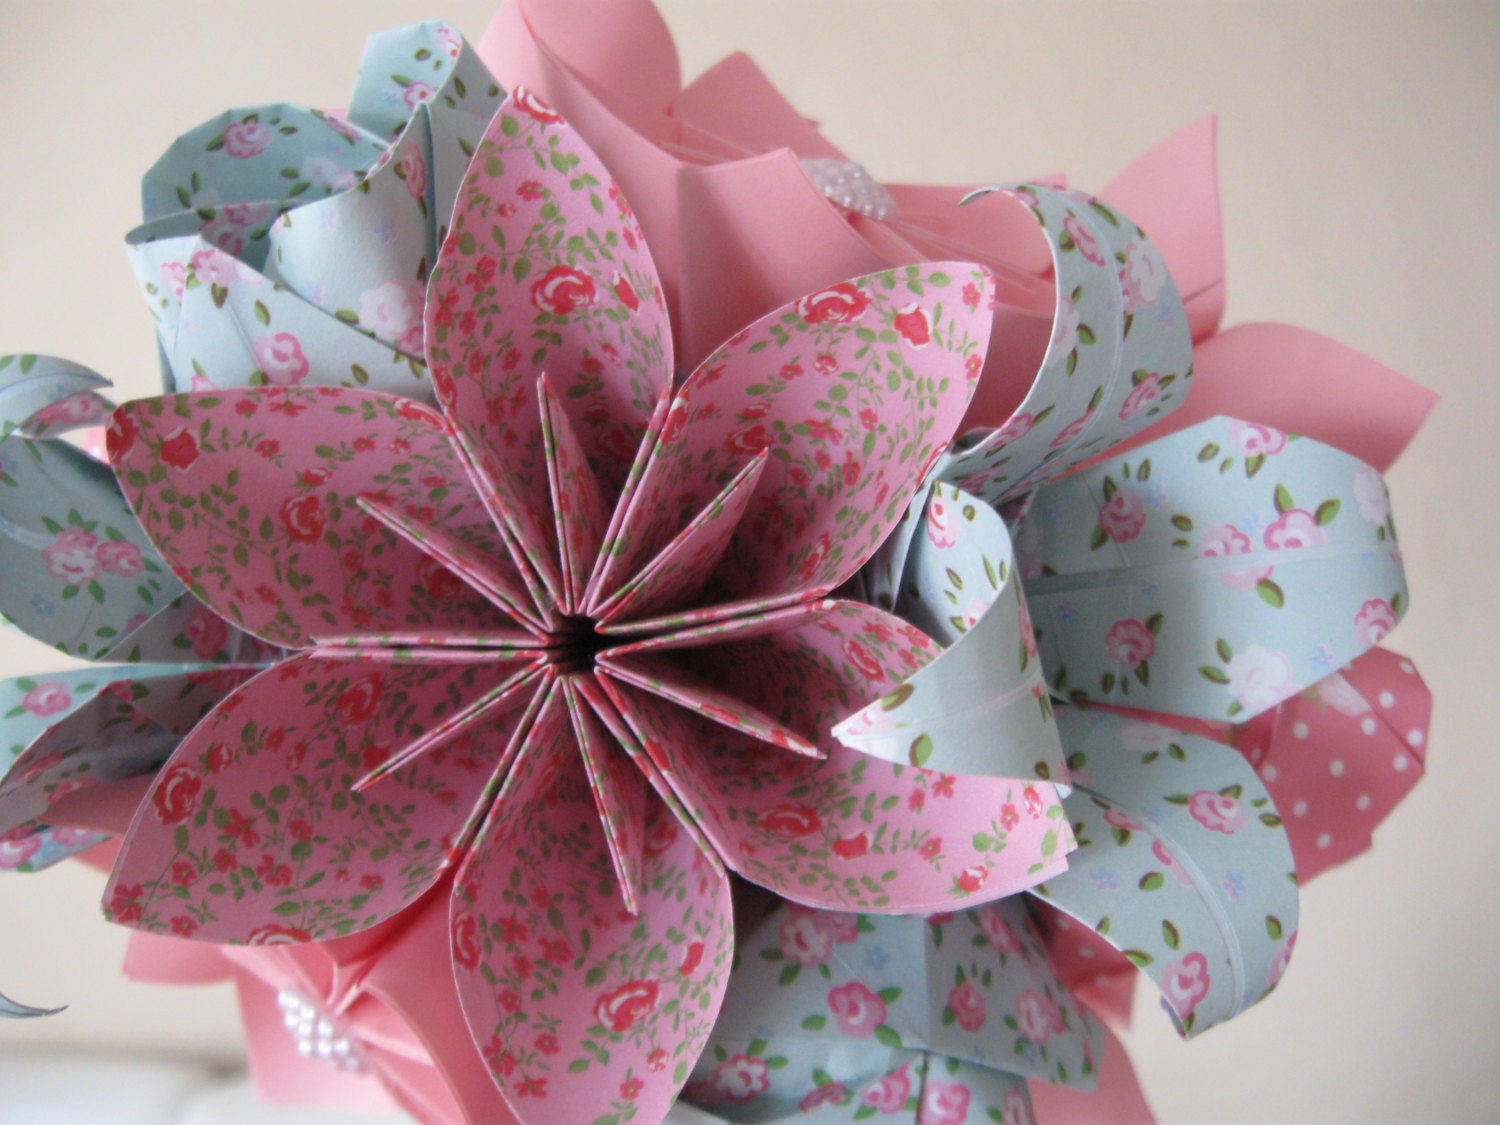 small ball flower origami Paper Wedding Blue Pink Etsy by Origami bouquet on flowers Palisya